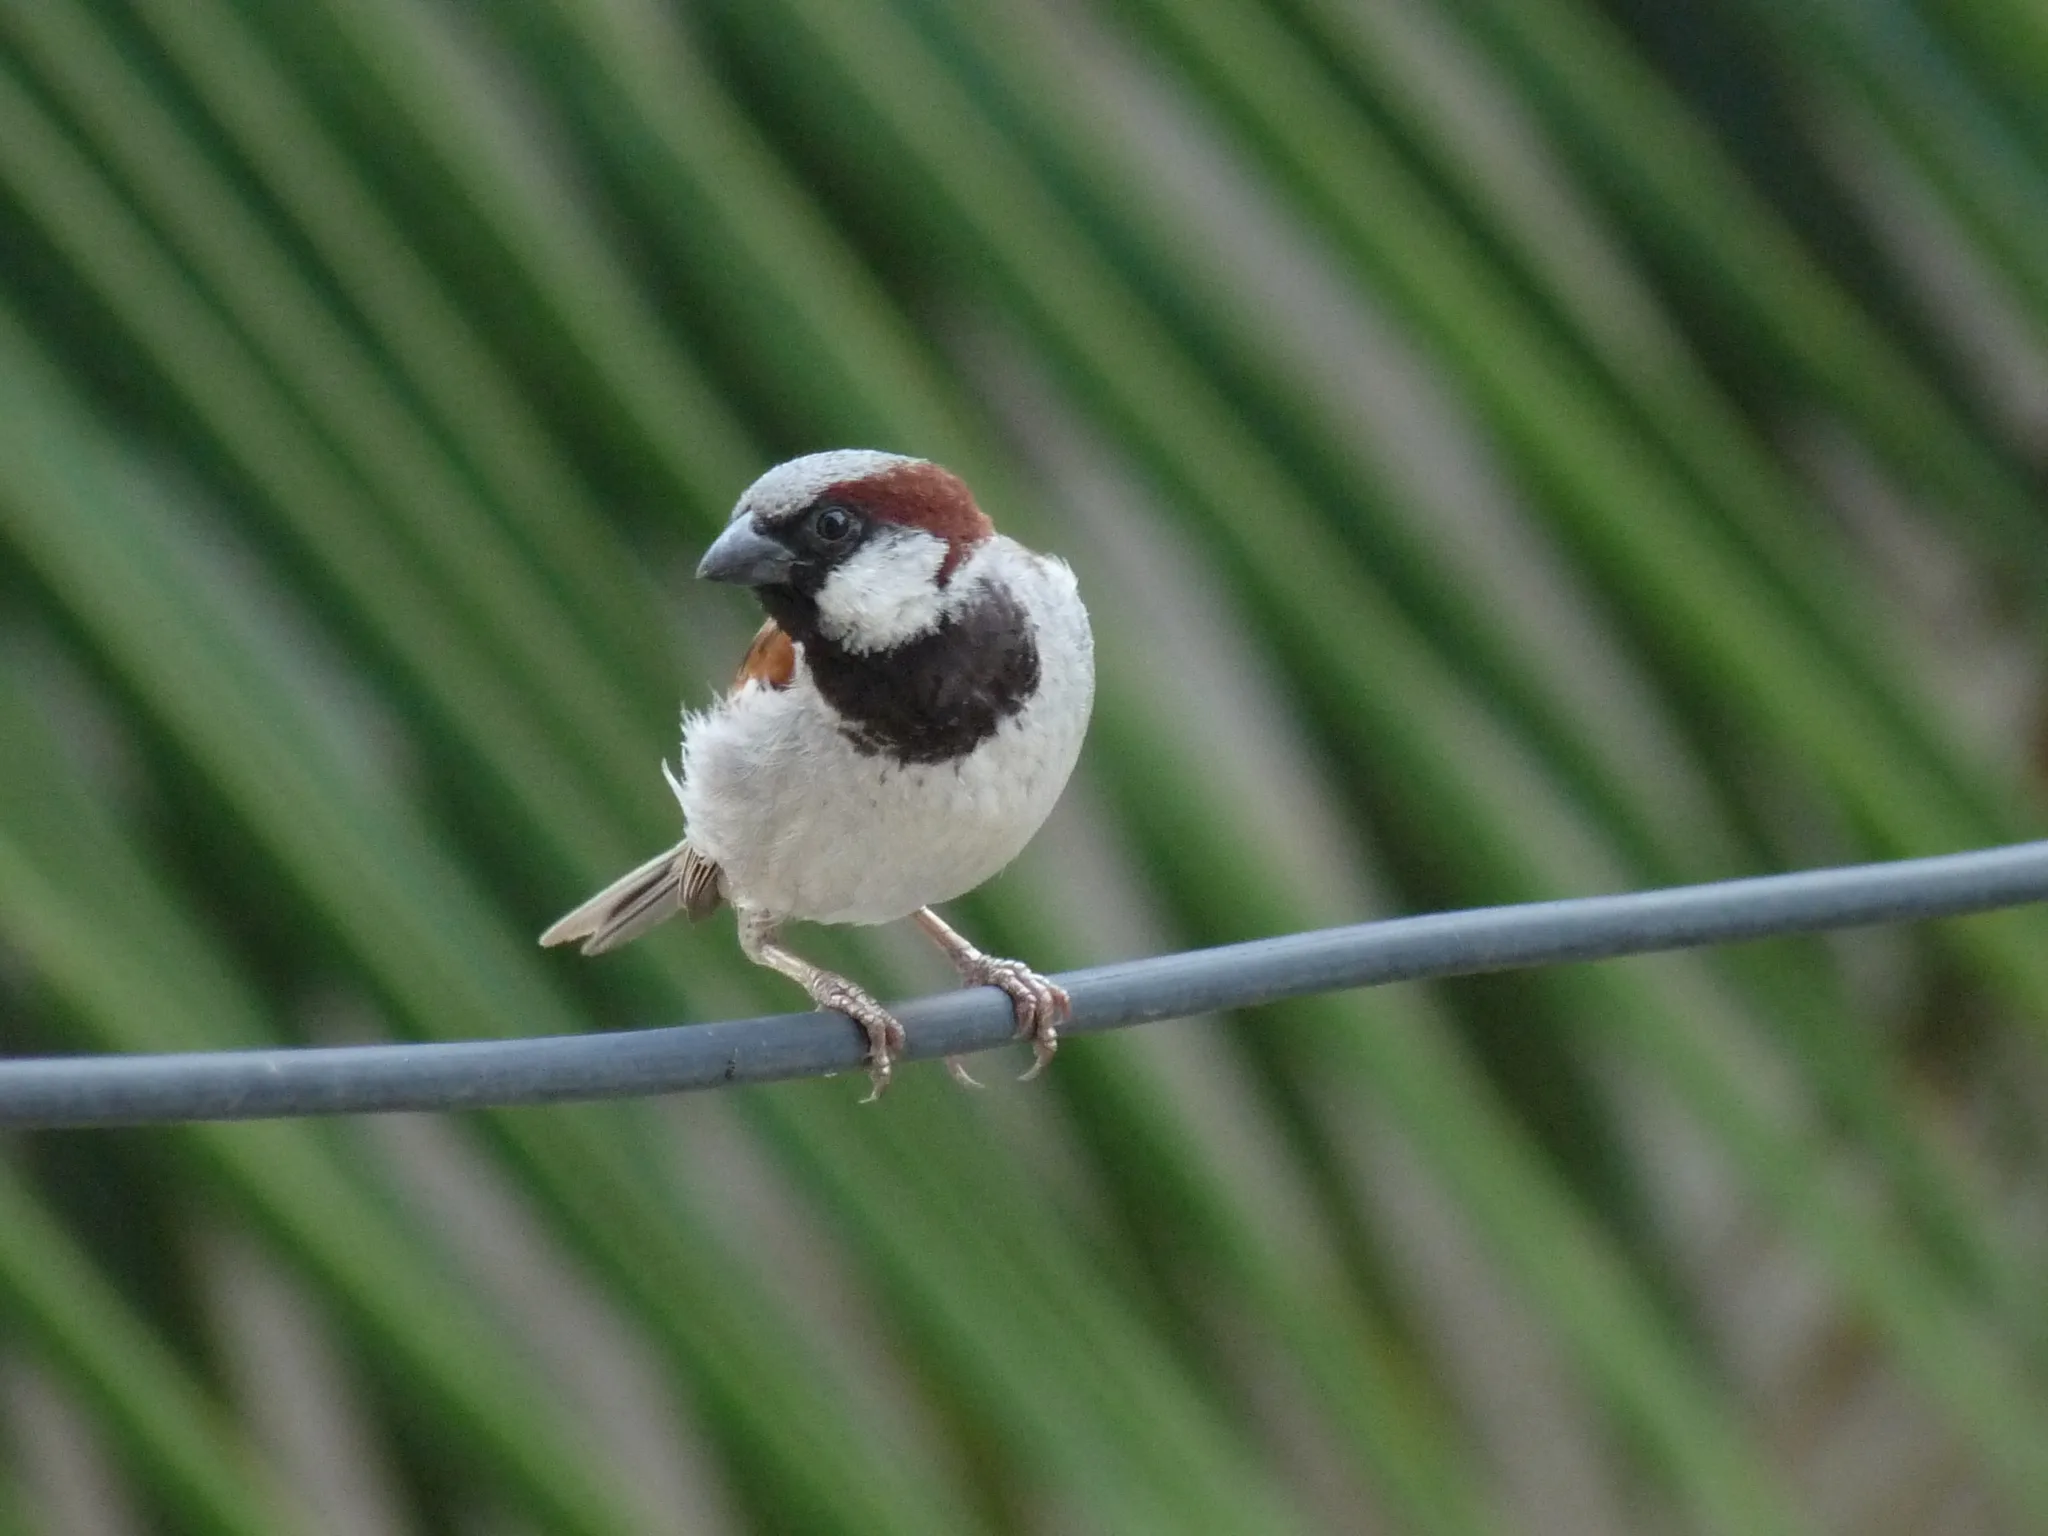 Like a note on a scale, a male House Sparrow at perch